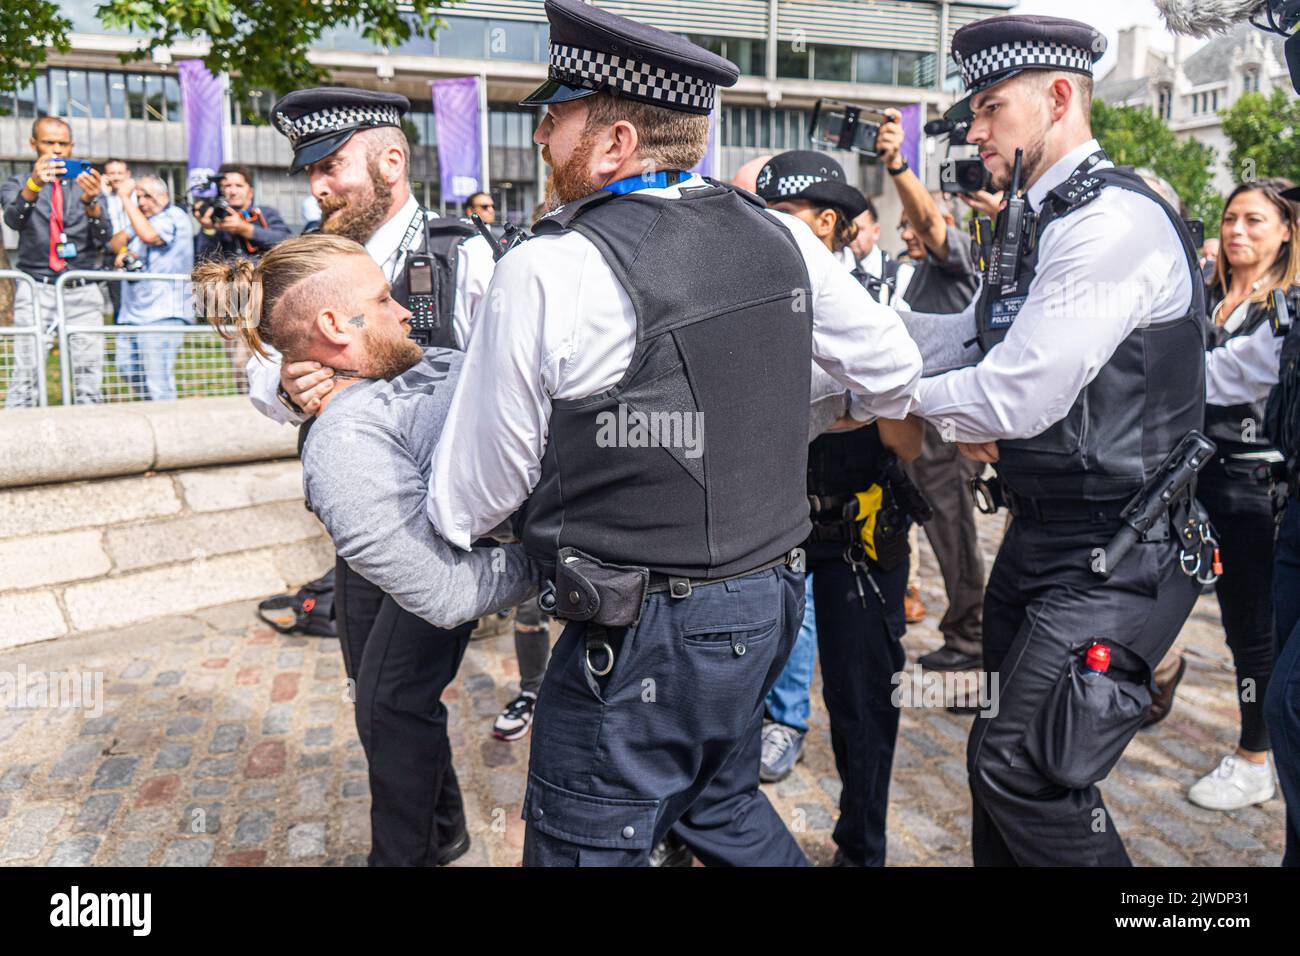 London UK. 5 September 2022.  An animal rebellion protesters is carried away by polic officers after  staging a sit in blocking the road opposite the Queen Elizabeth II centre  as   Liz Truss is due to be elected as the new Conservative party leader and prime minister a Credit amer ghazzal/Alamy Live News Stock Photo